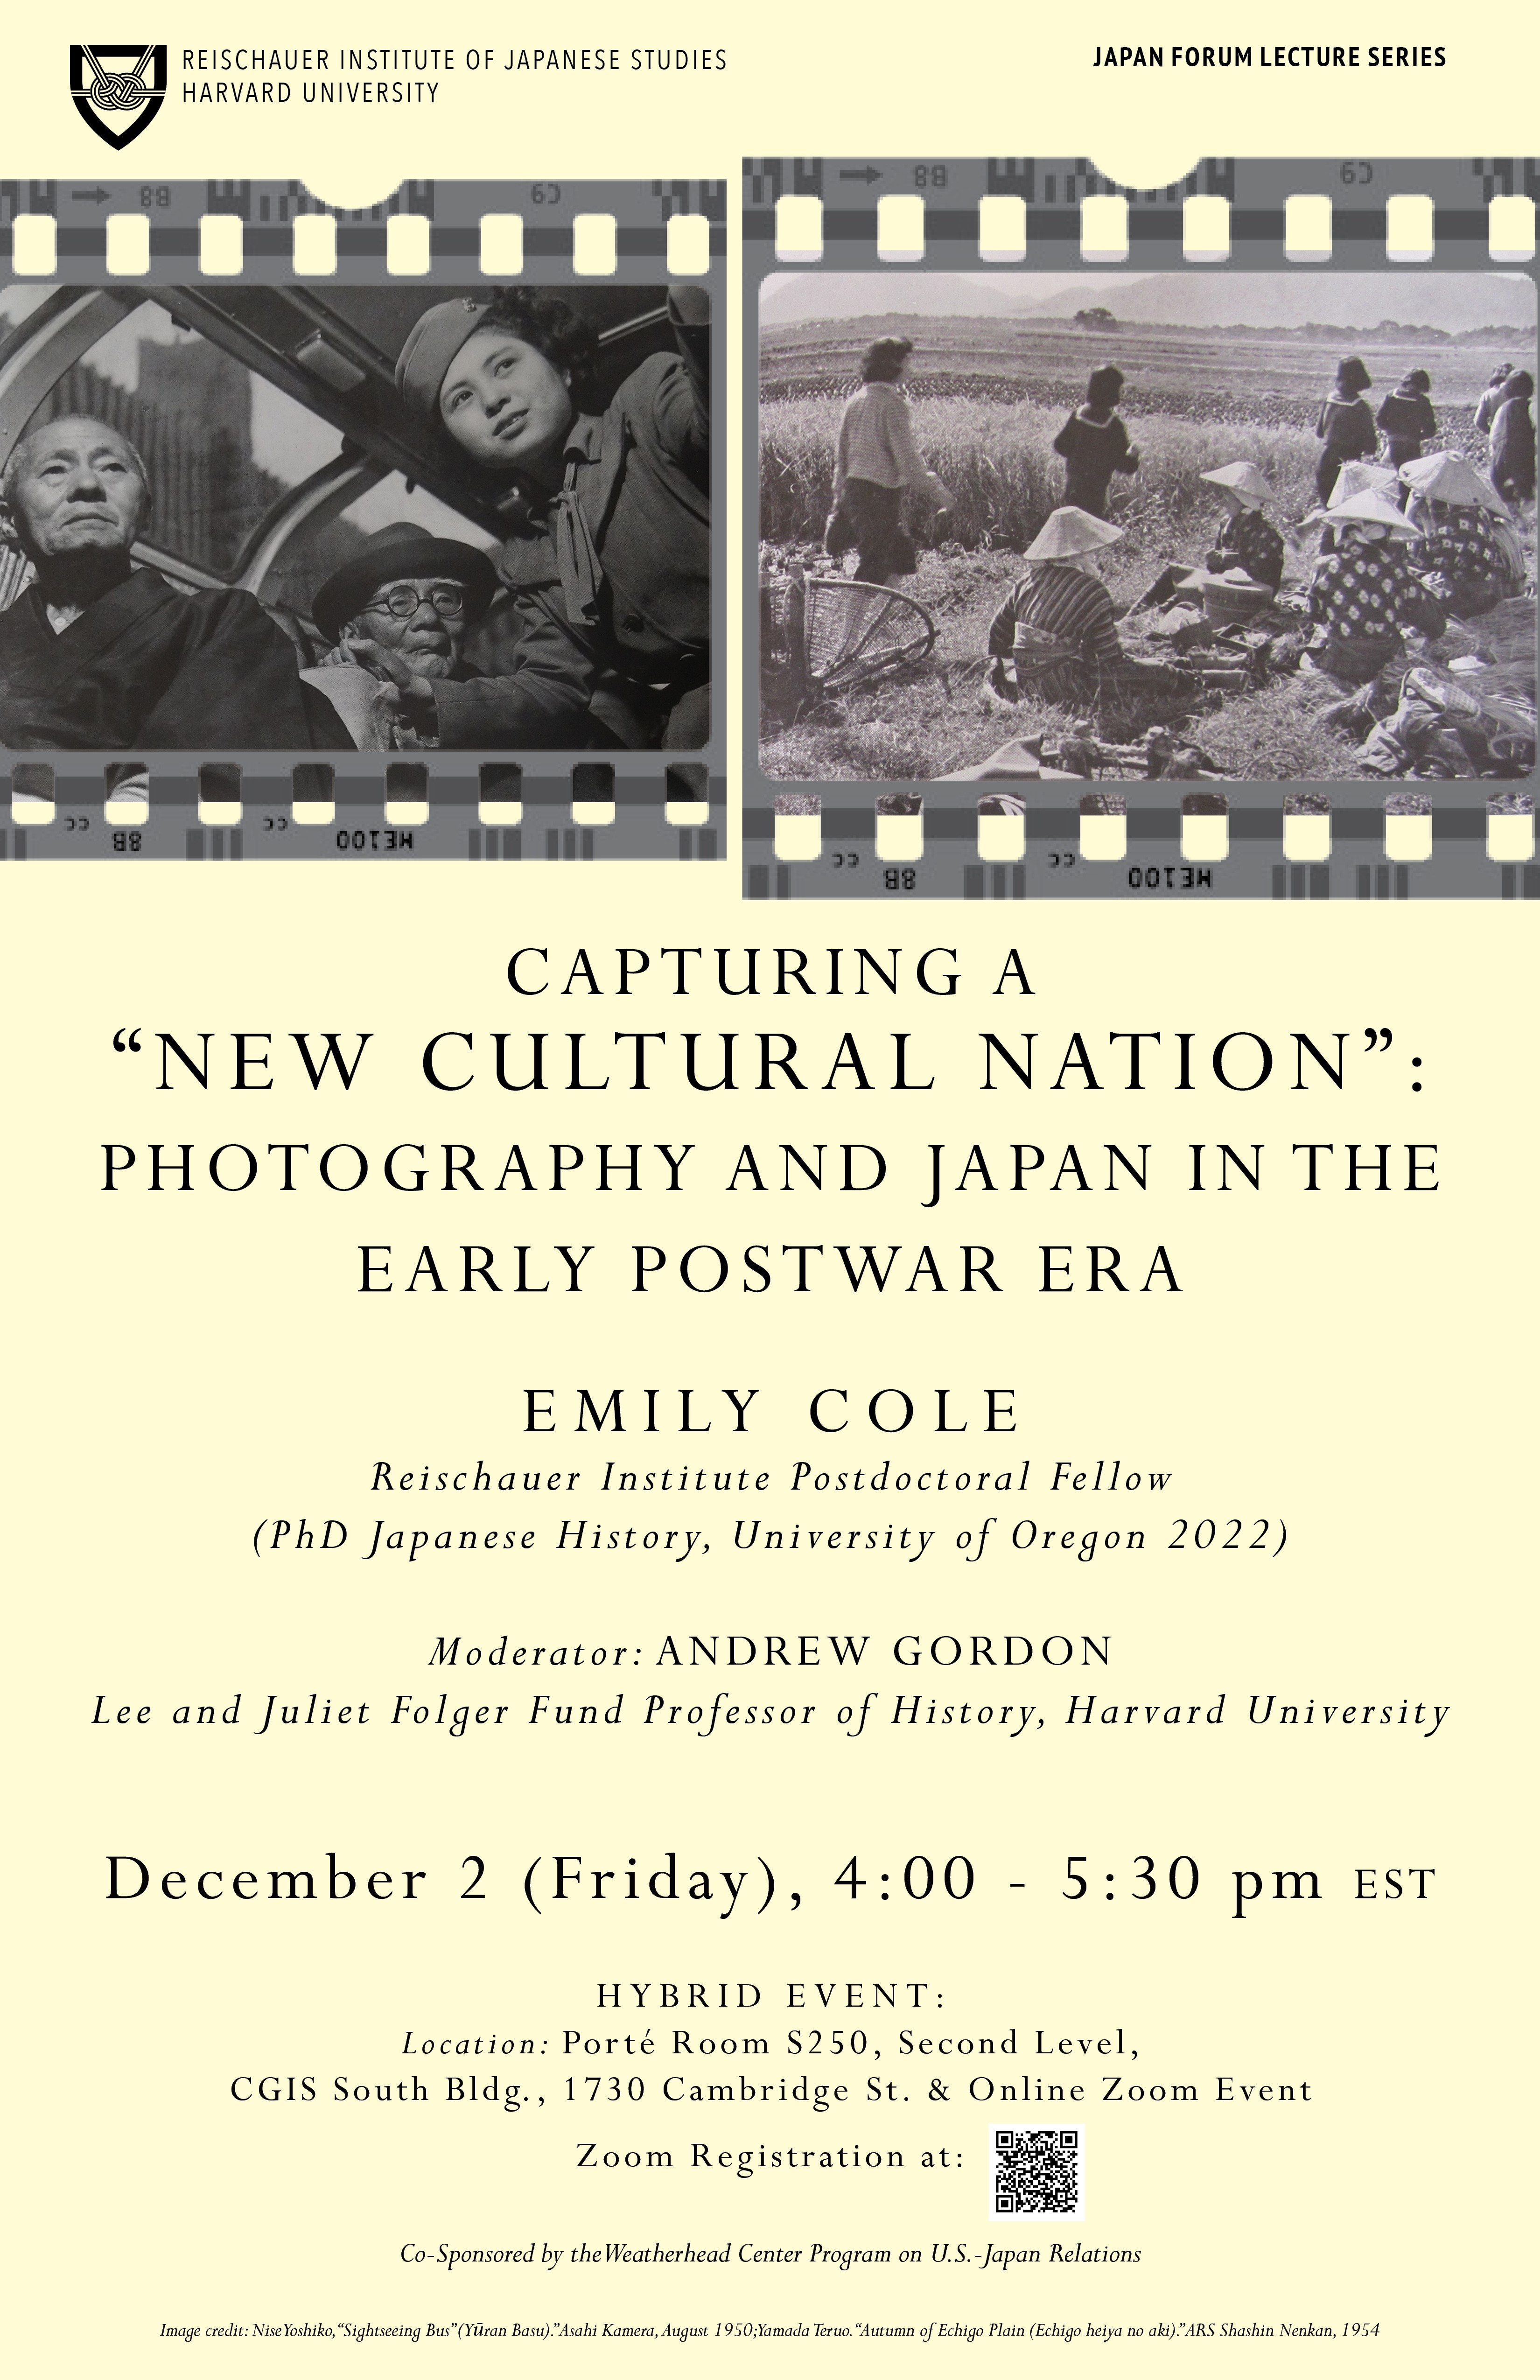 Poster advertising upcoming Japan Forum with Emily Cole. Text on events details is overlaid on a yellow background next to two black and white photographs from post-WWII Japan.